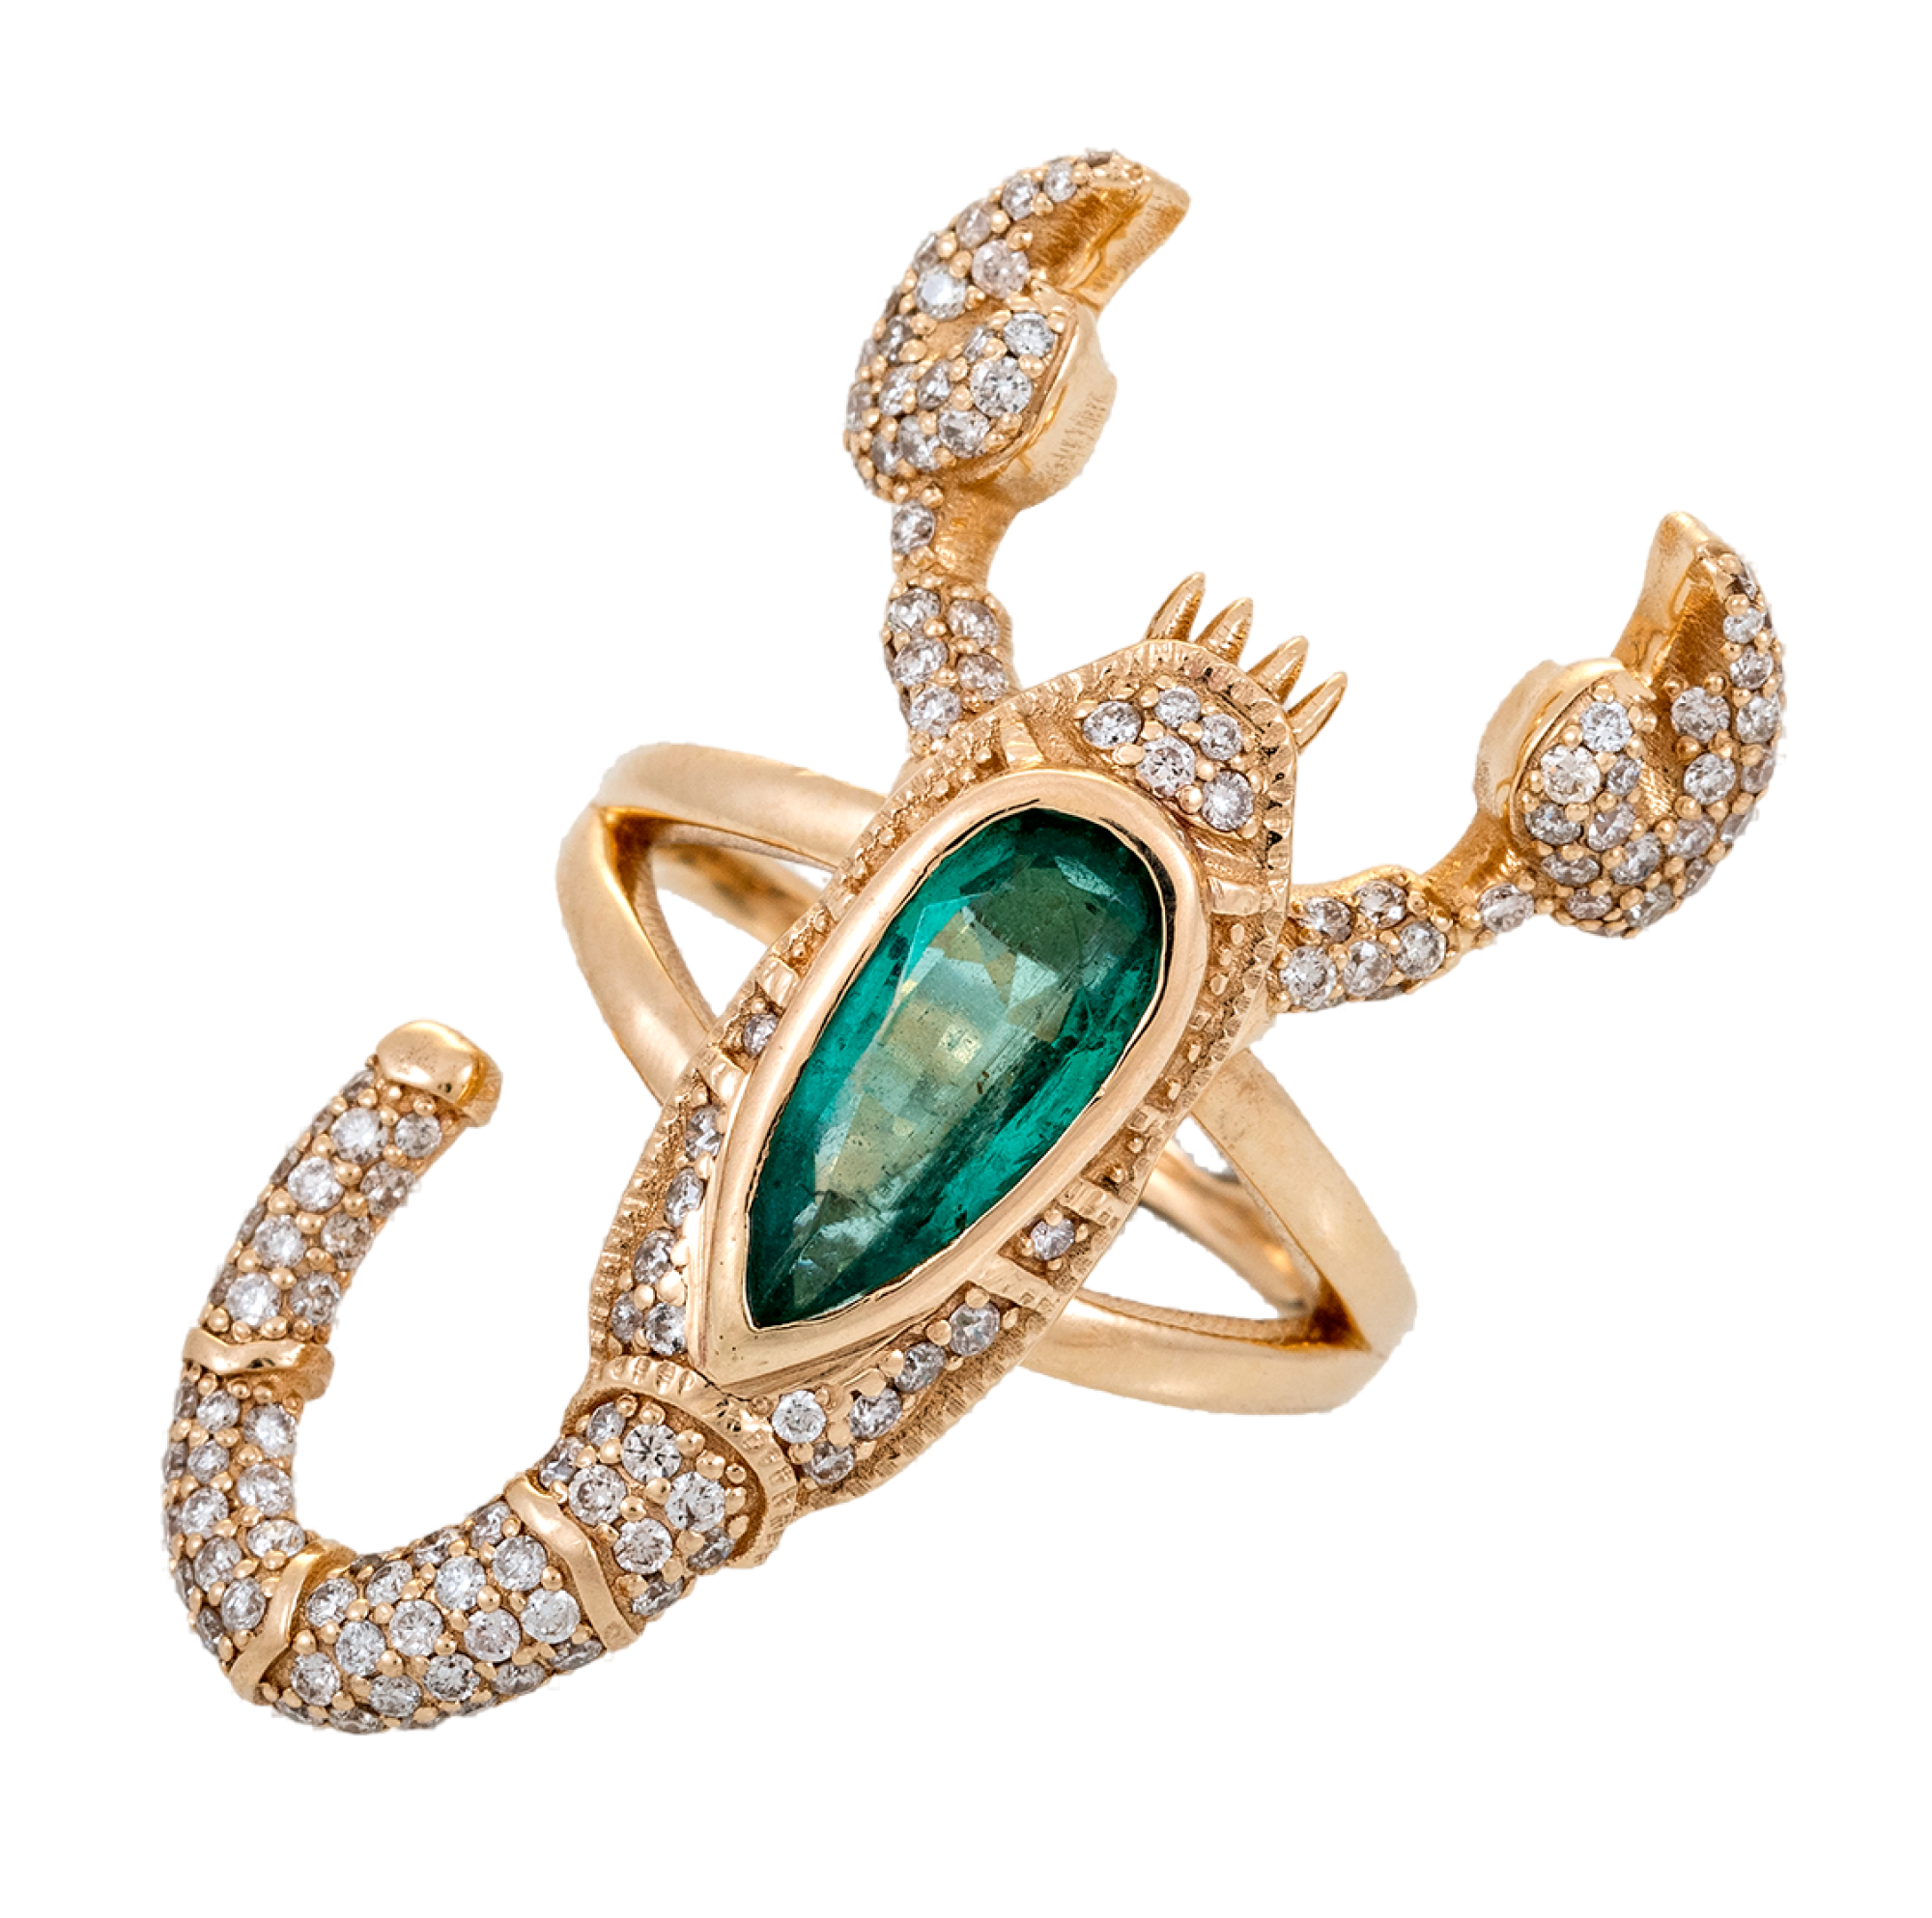 Scorpion ring with emerald pavé by Jacquie Aiche.